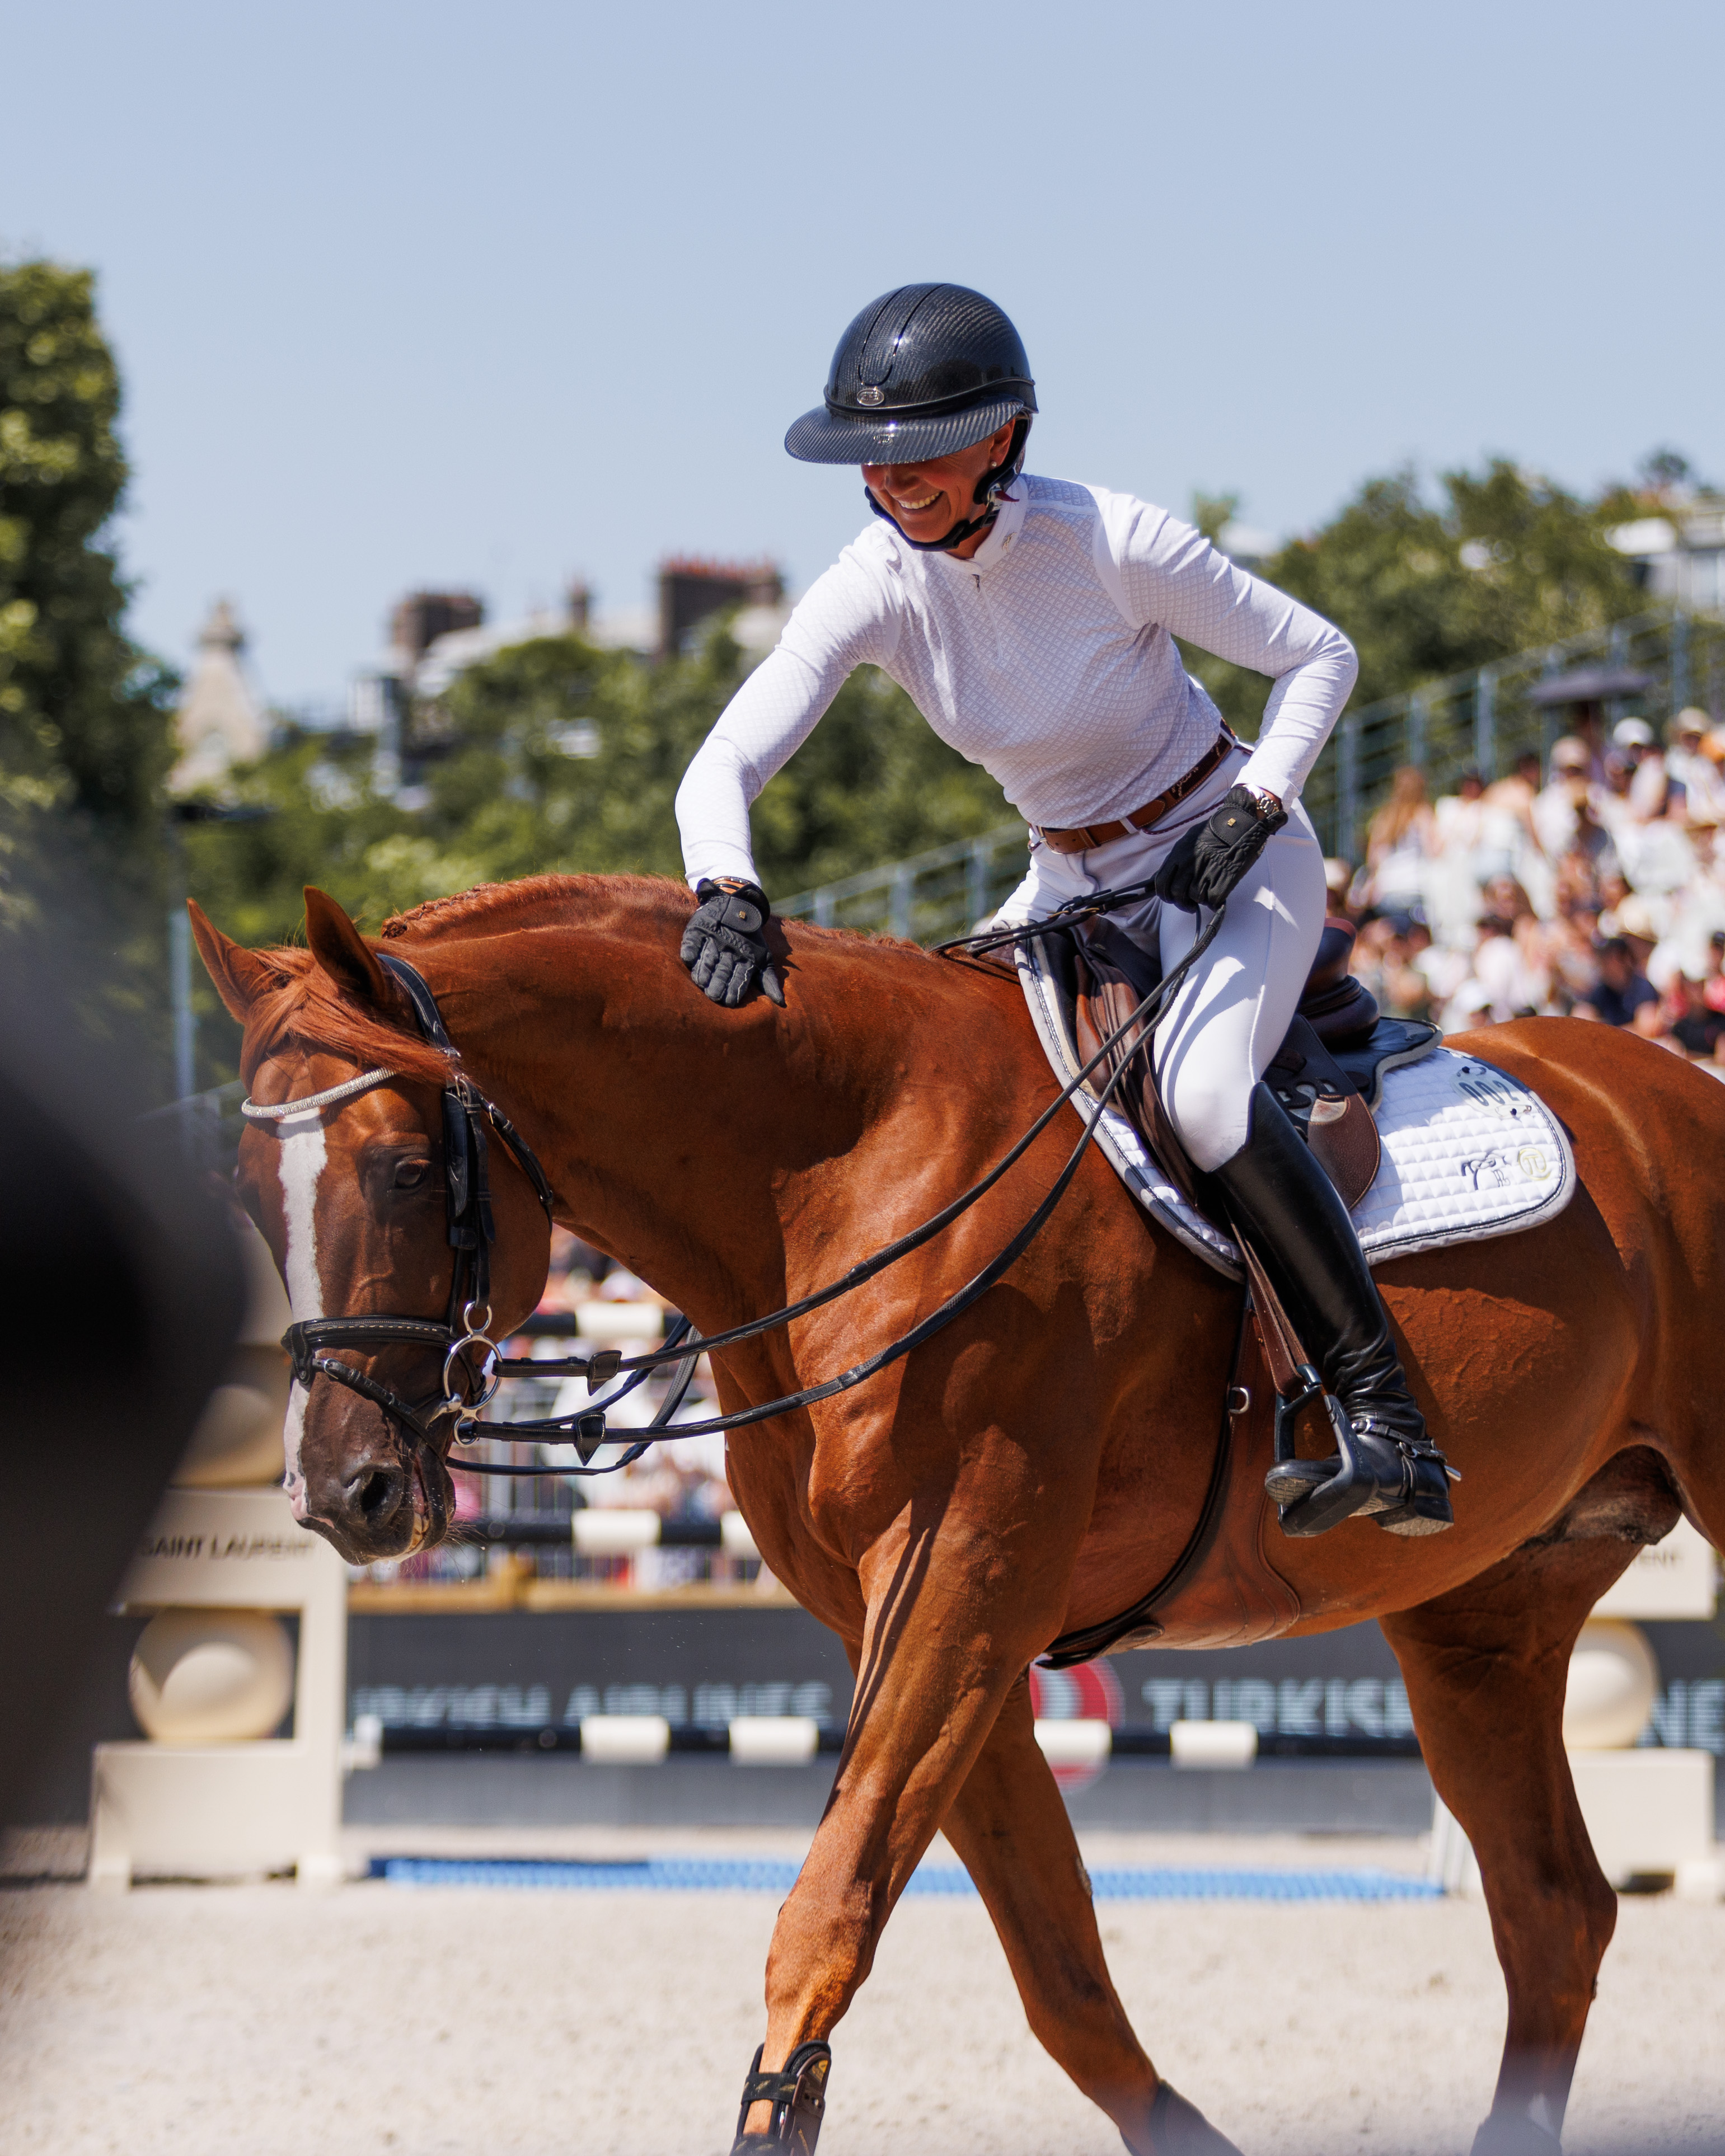 Penelope Leprevost and Djagger Semilly on top in Thursday's CSI4* 1.50m Big Tour Grand Prix Qualifier at Sunshine Tour